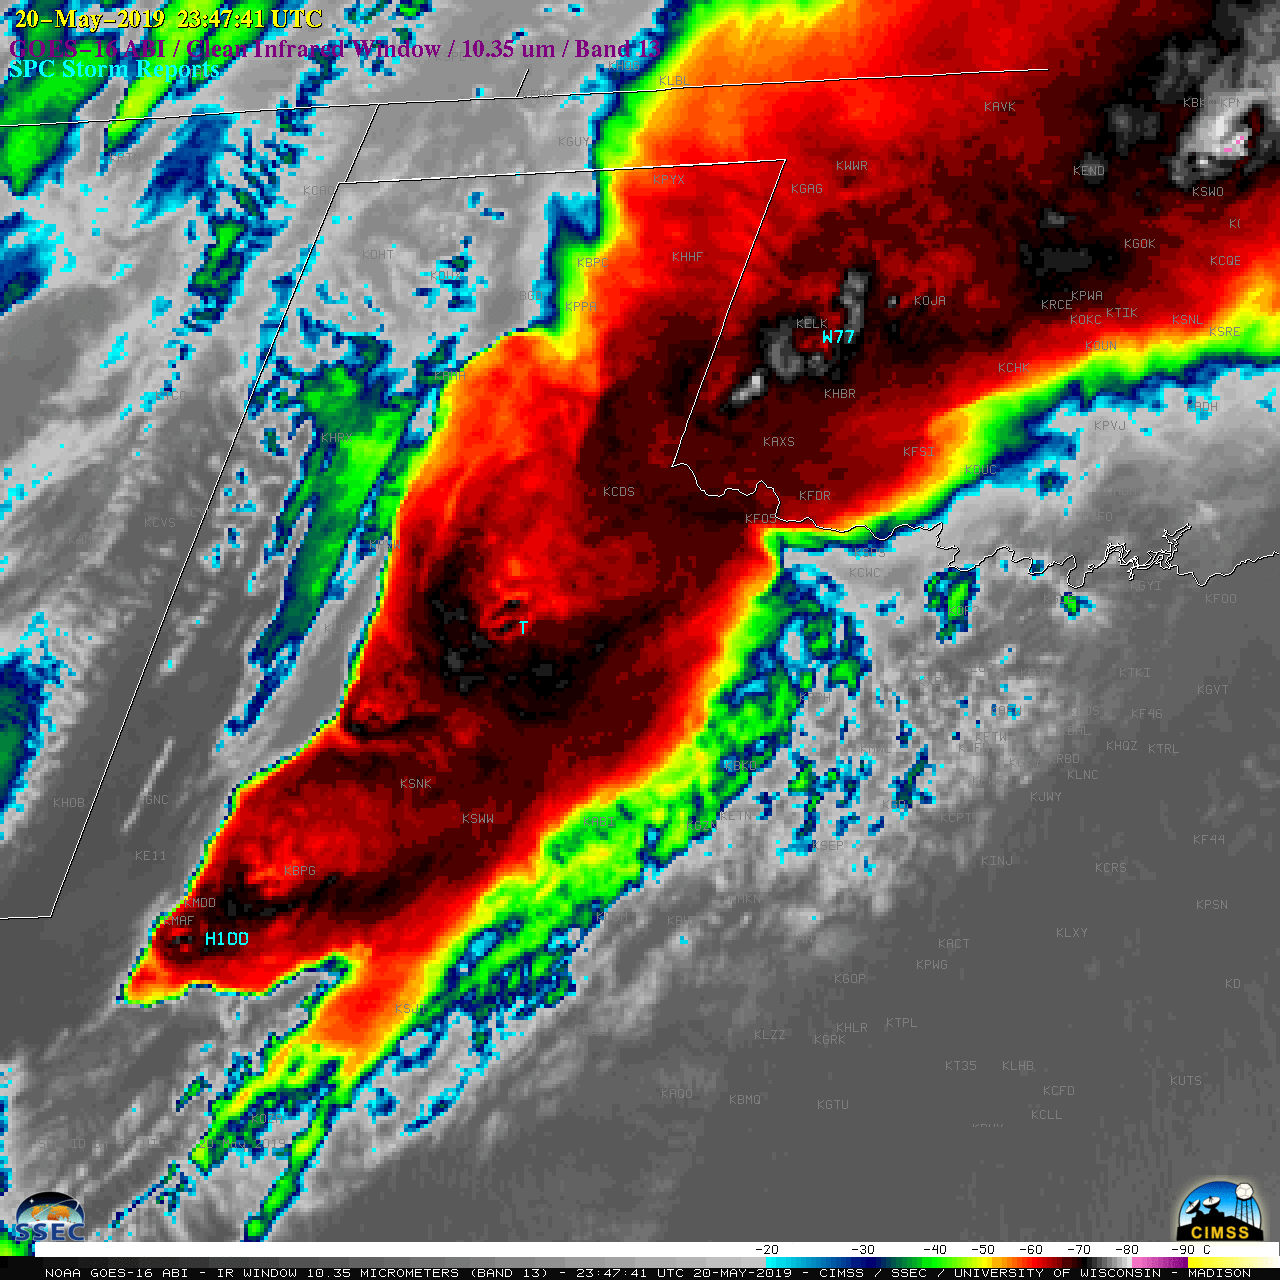 GOES-16 "Clean" Infrared Window (10.35 µm) images, with SPC Storm Reports plotted in cyan [click to play MP4 animation]